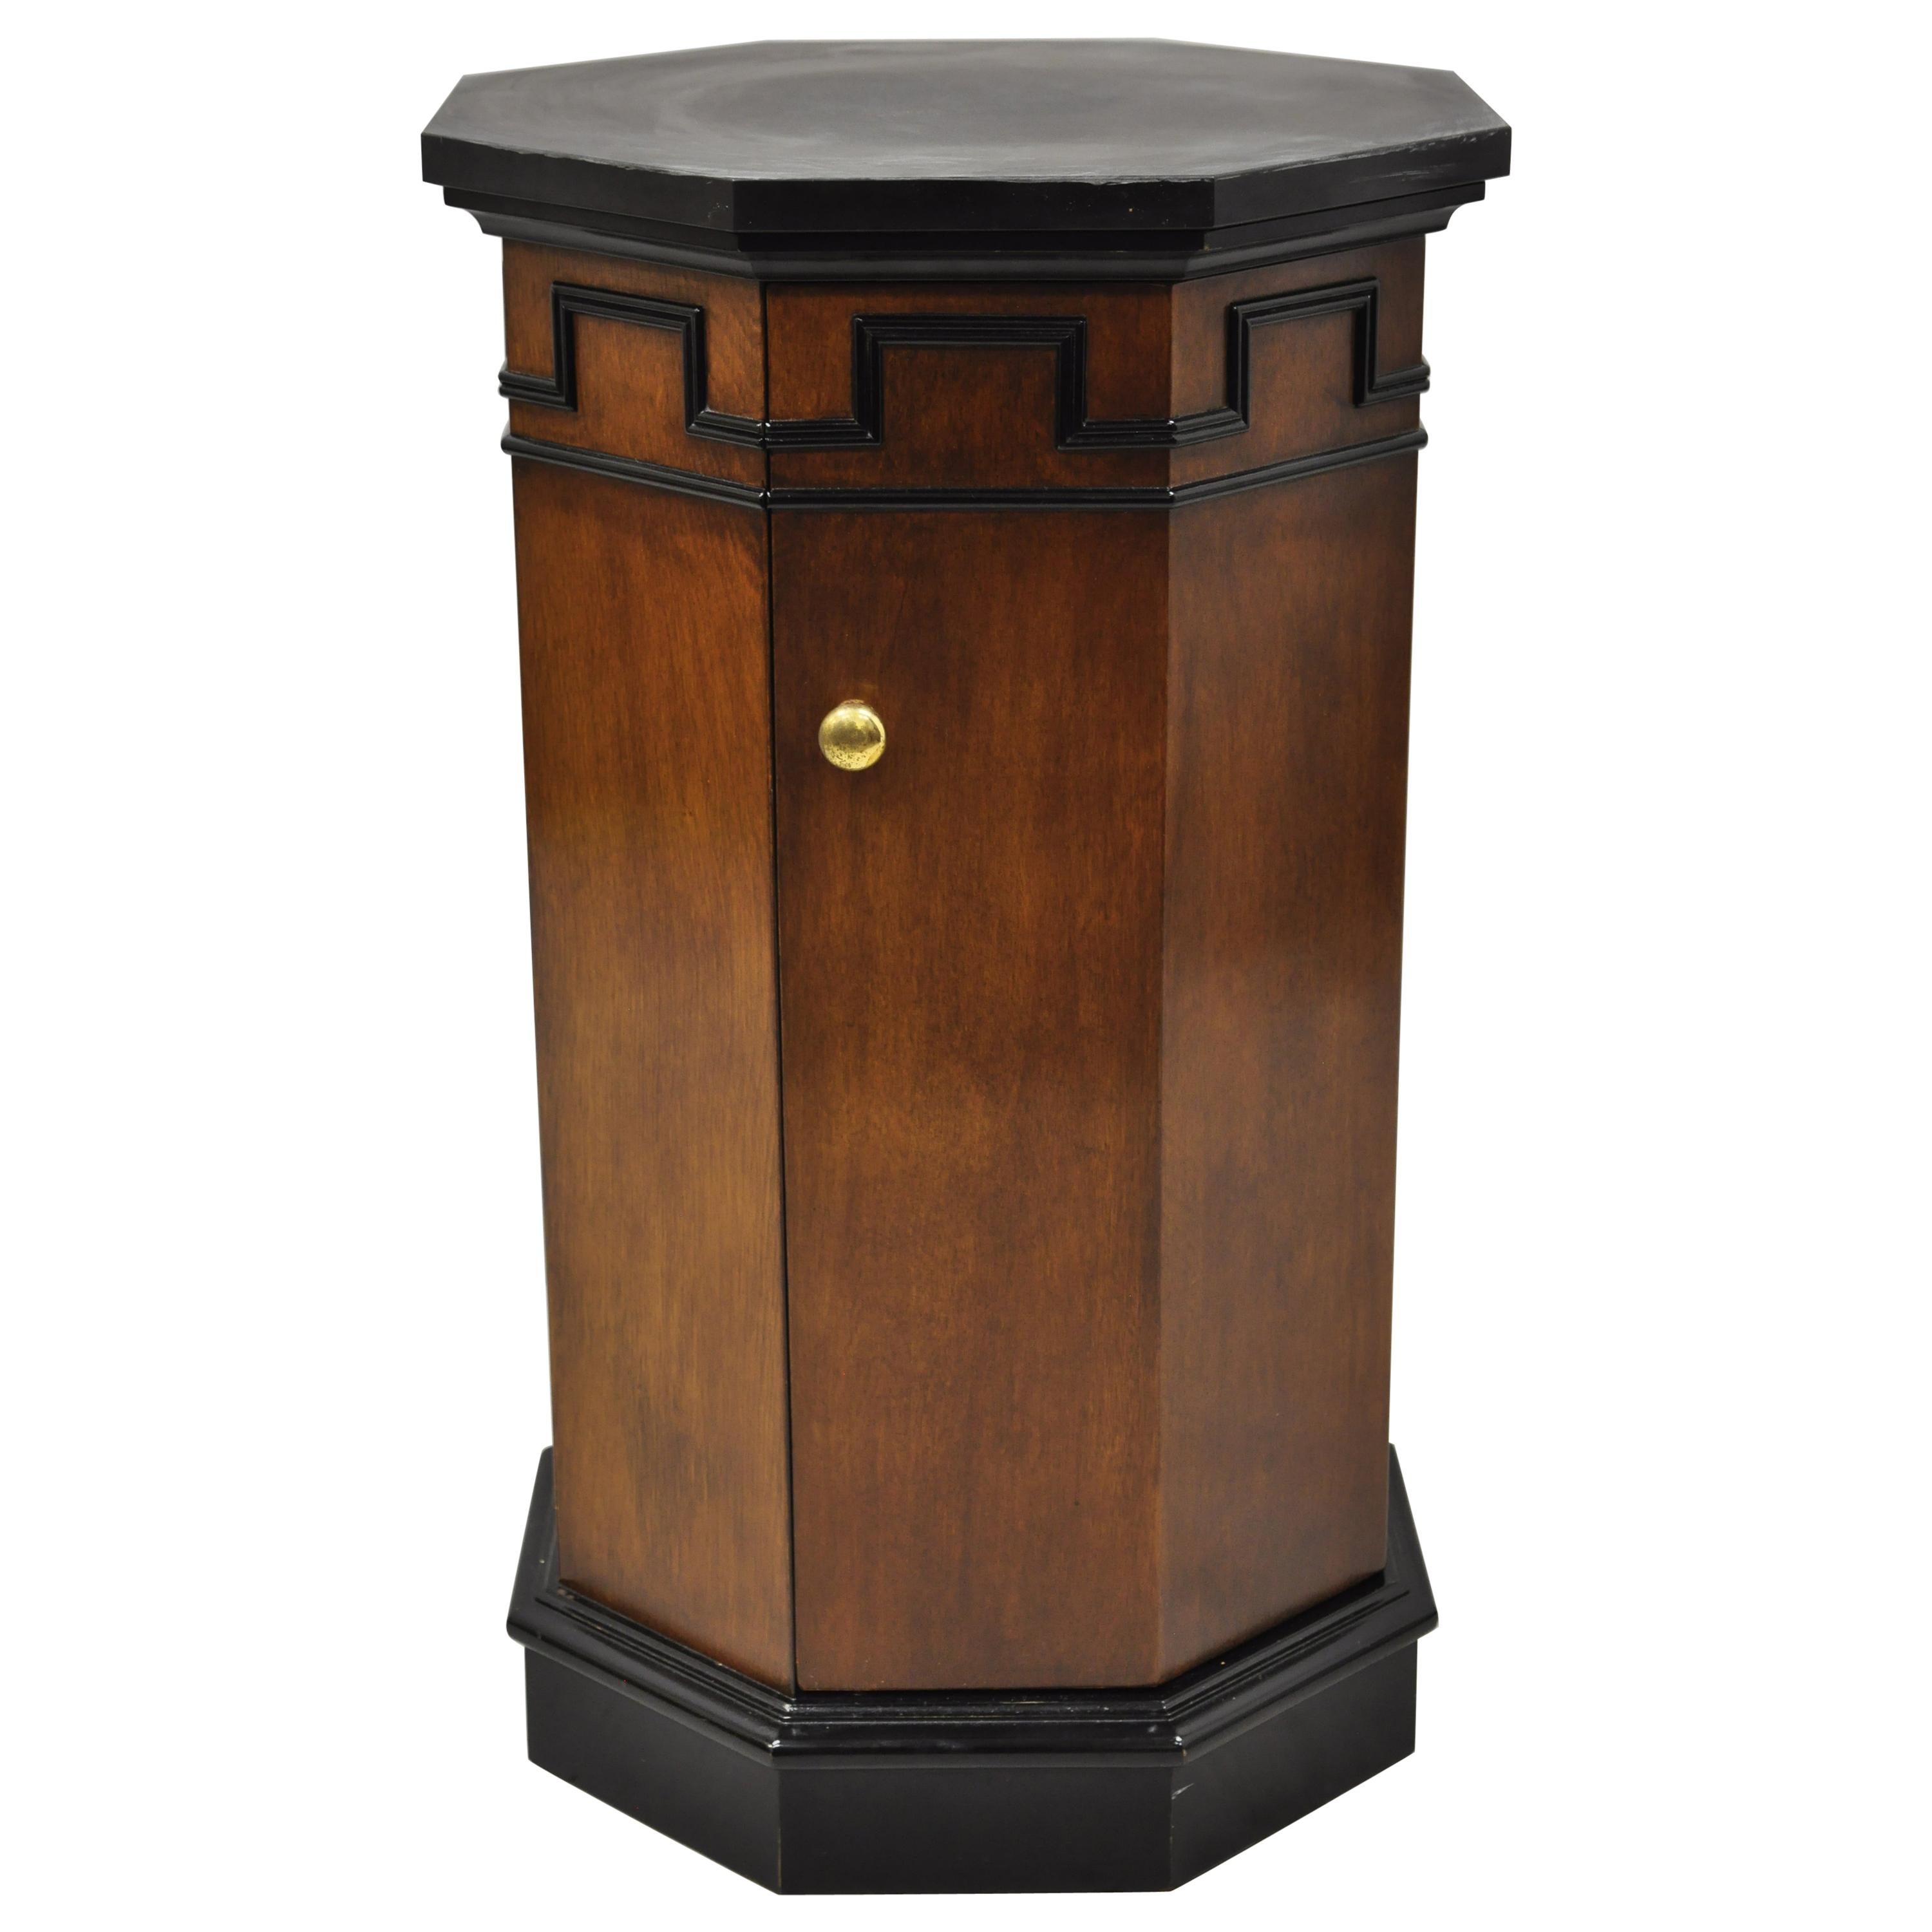 Vintage Round Slate Top Mahogany Pedestal Classical Column Cabinet Storage Stand